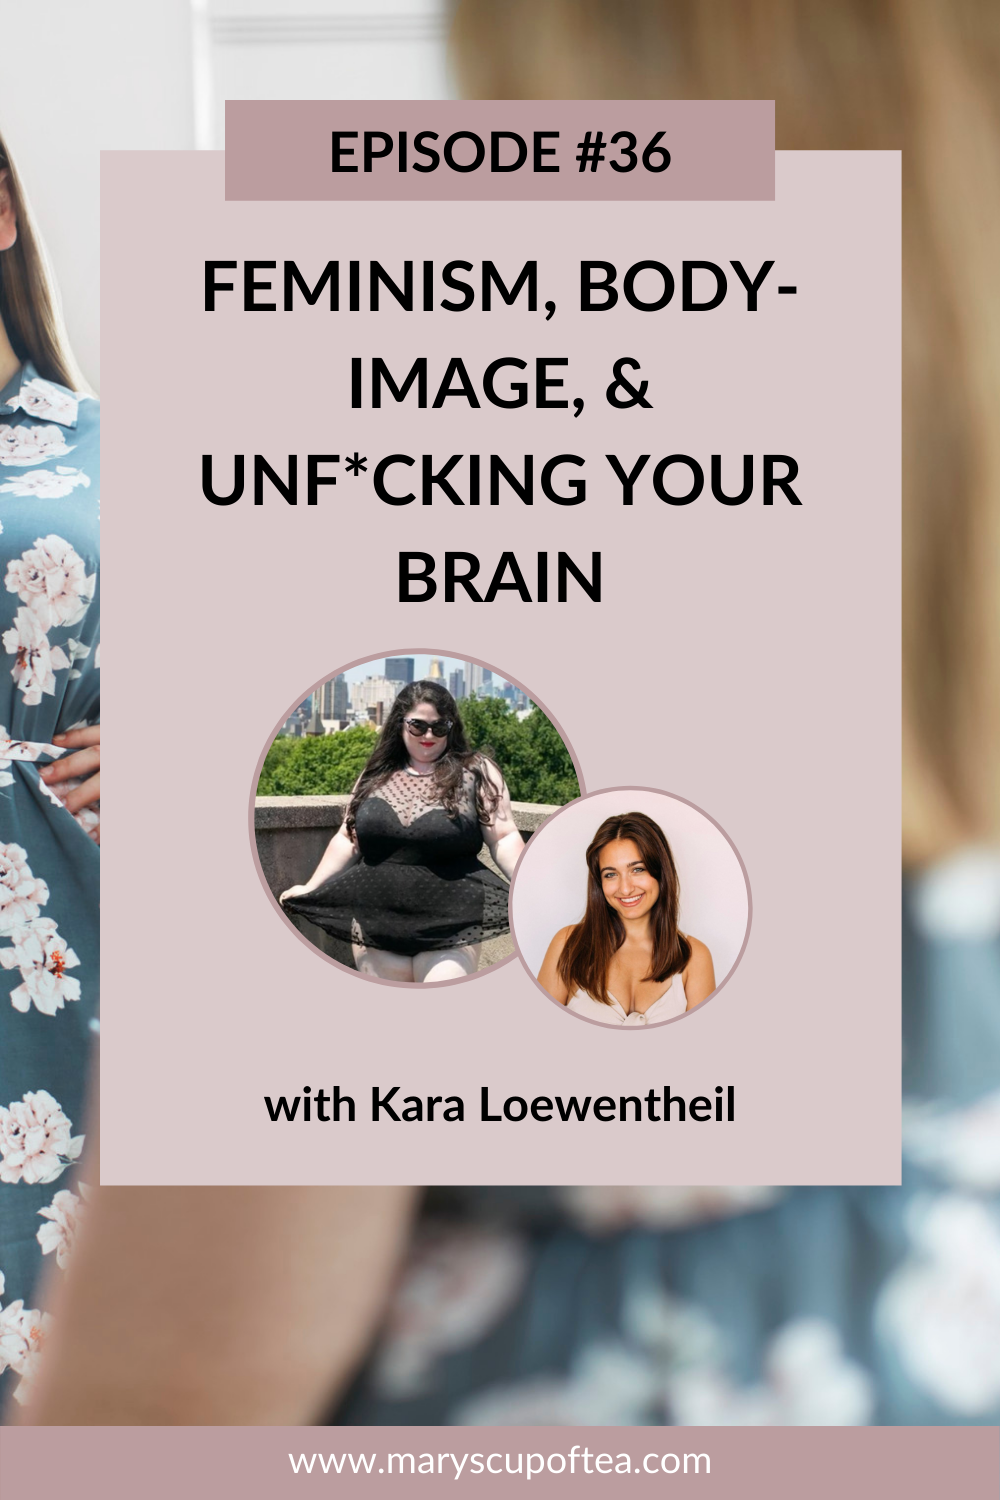 Are you ready to improve your body image, unfuck your brain, and be the bad-a** feminist you know you are? Then you HAVE to listen to this podcast interview with Kara Loewentheil of the Unf*ck Your Brain Podcast! Tune in on Apple Podcasts on by clicking through.